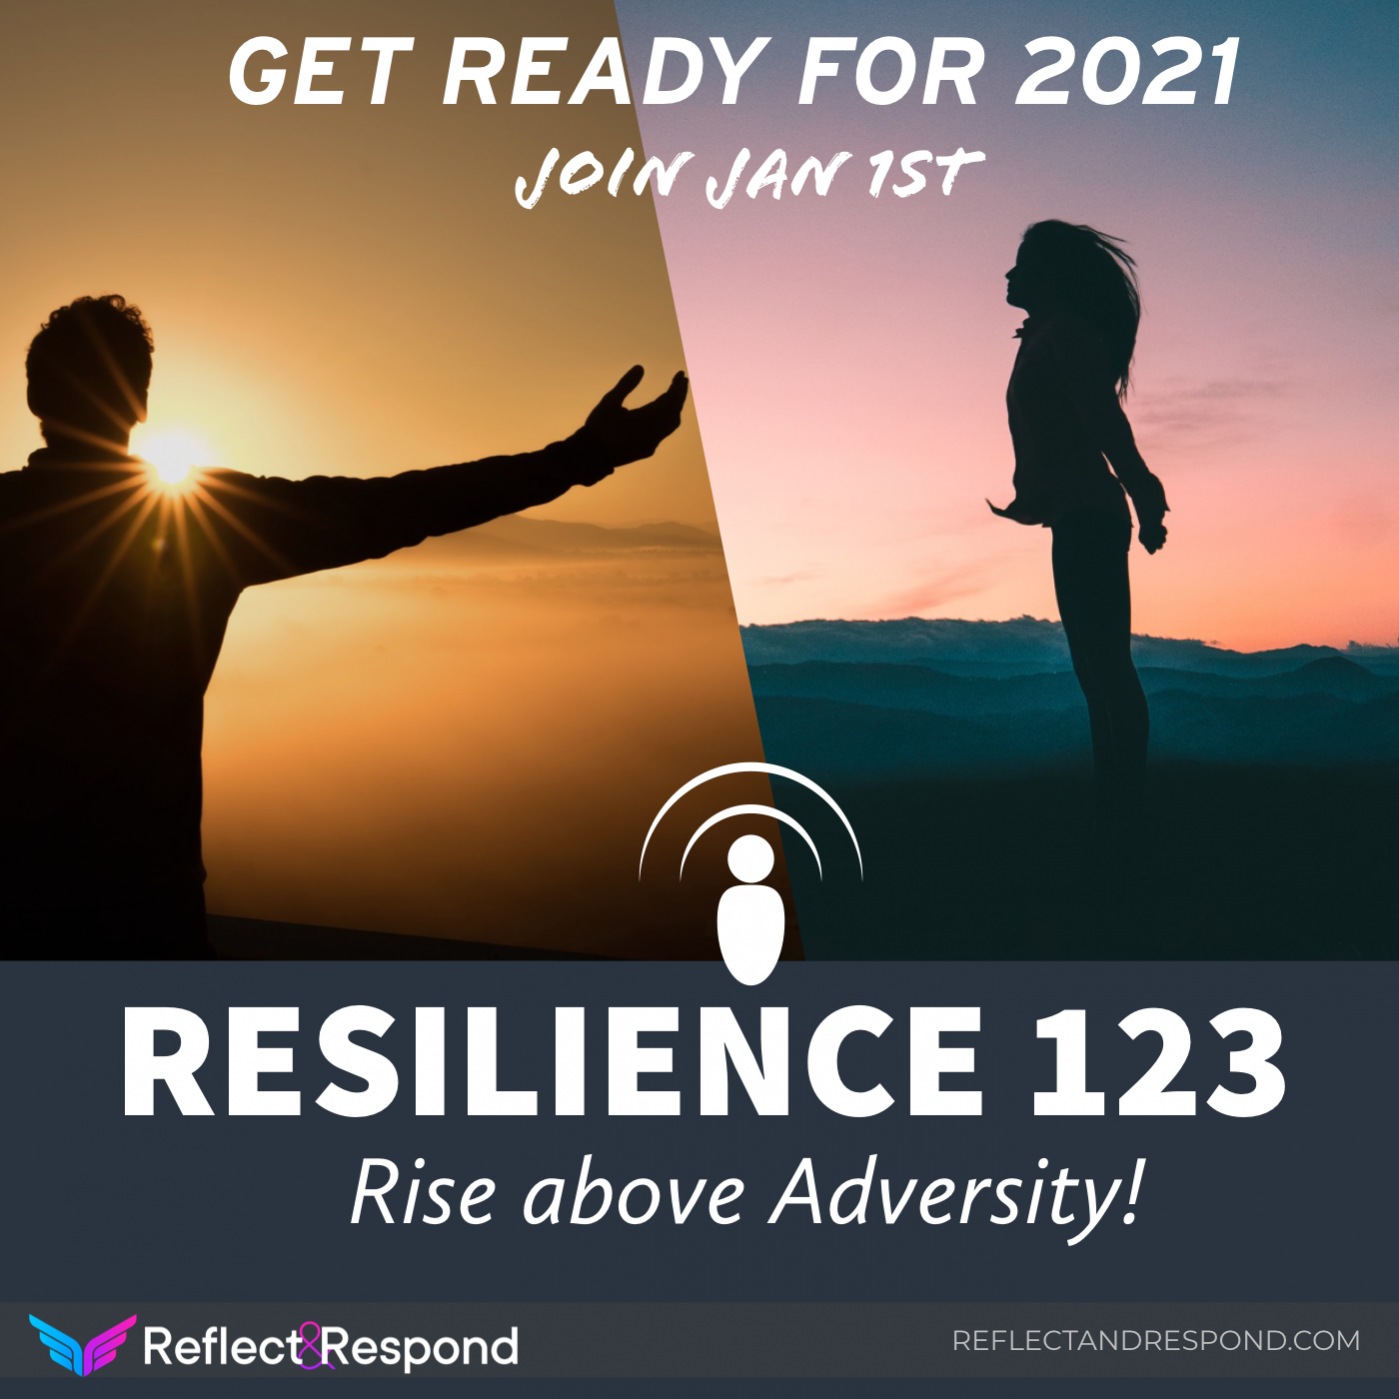 RESILIENCE 123 - Rise above Adversity